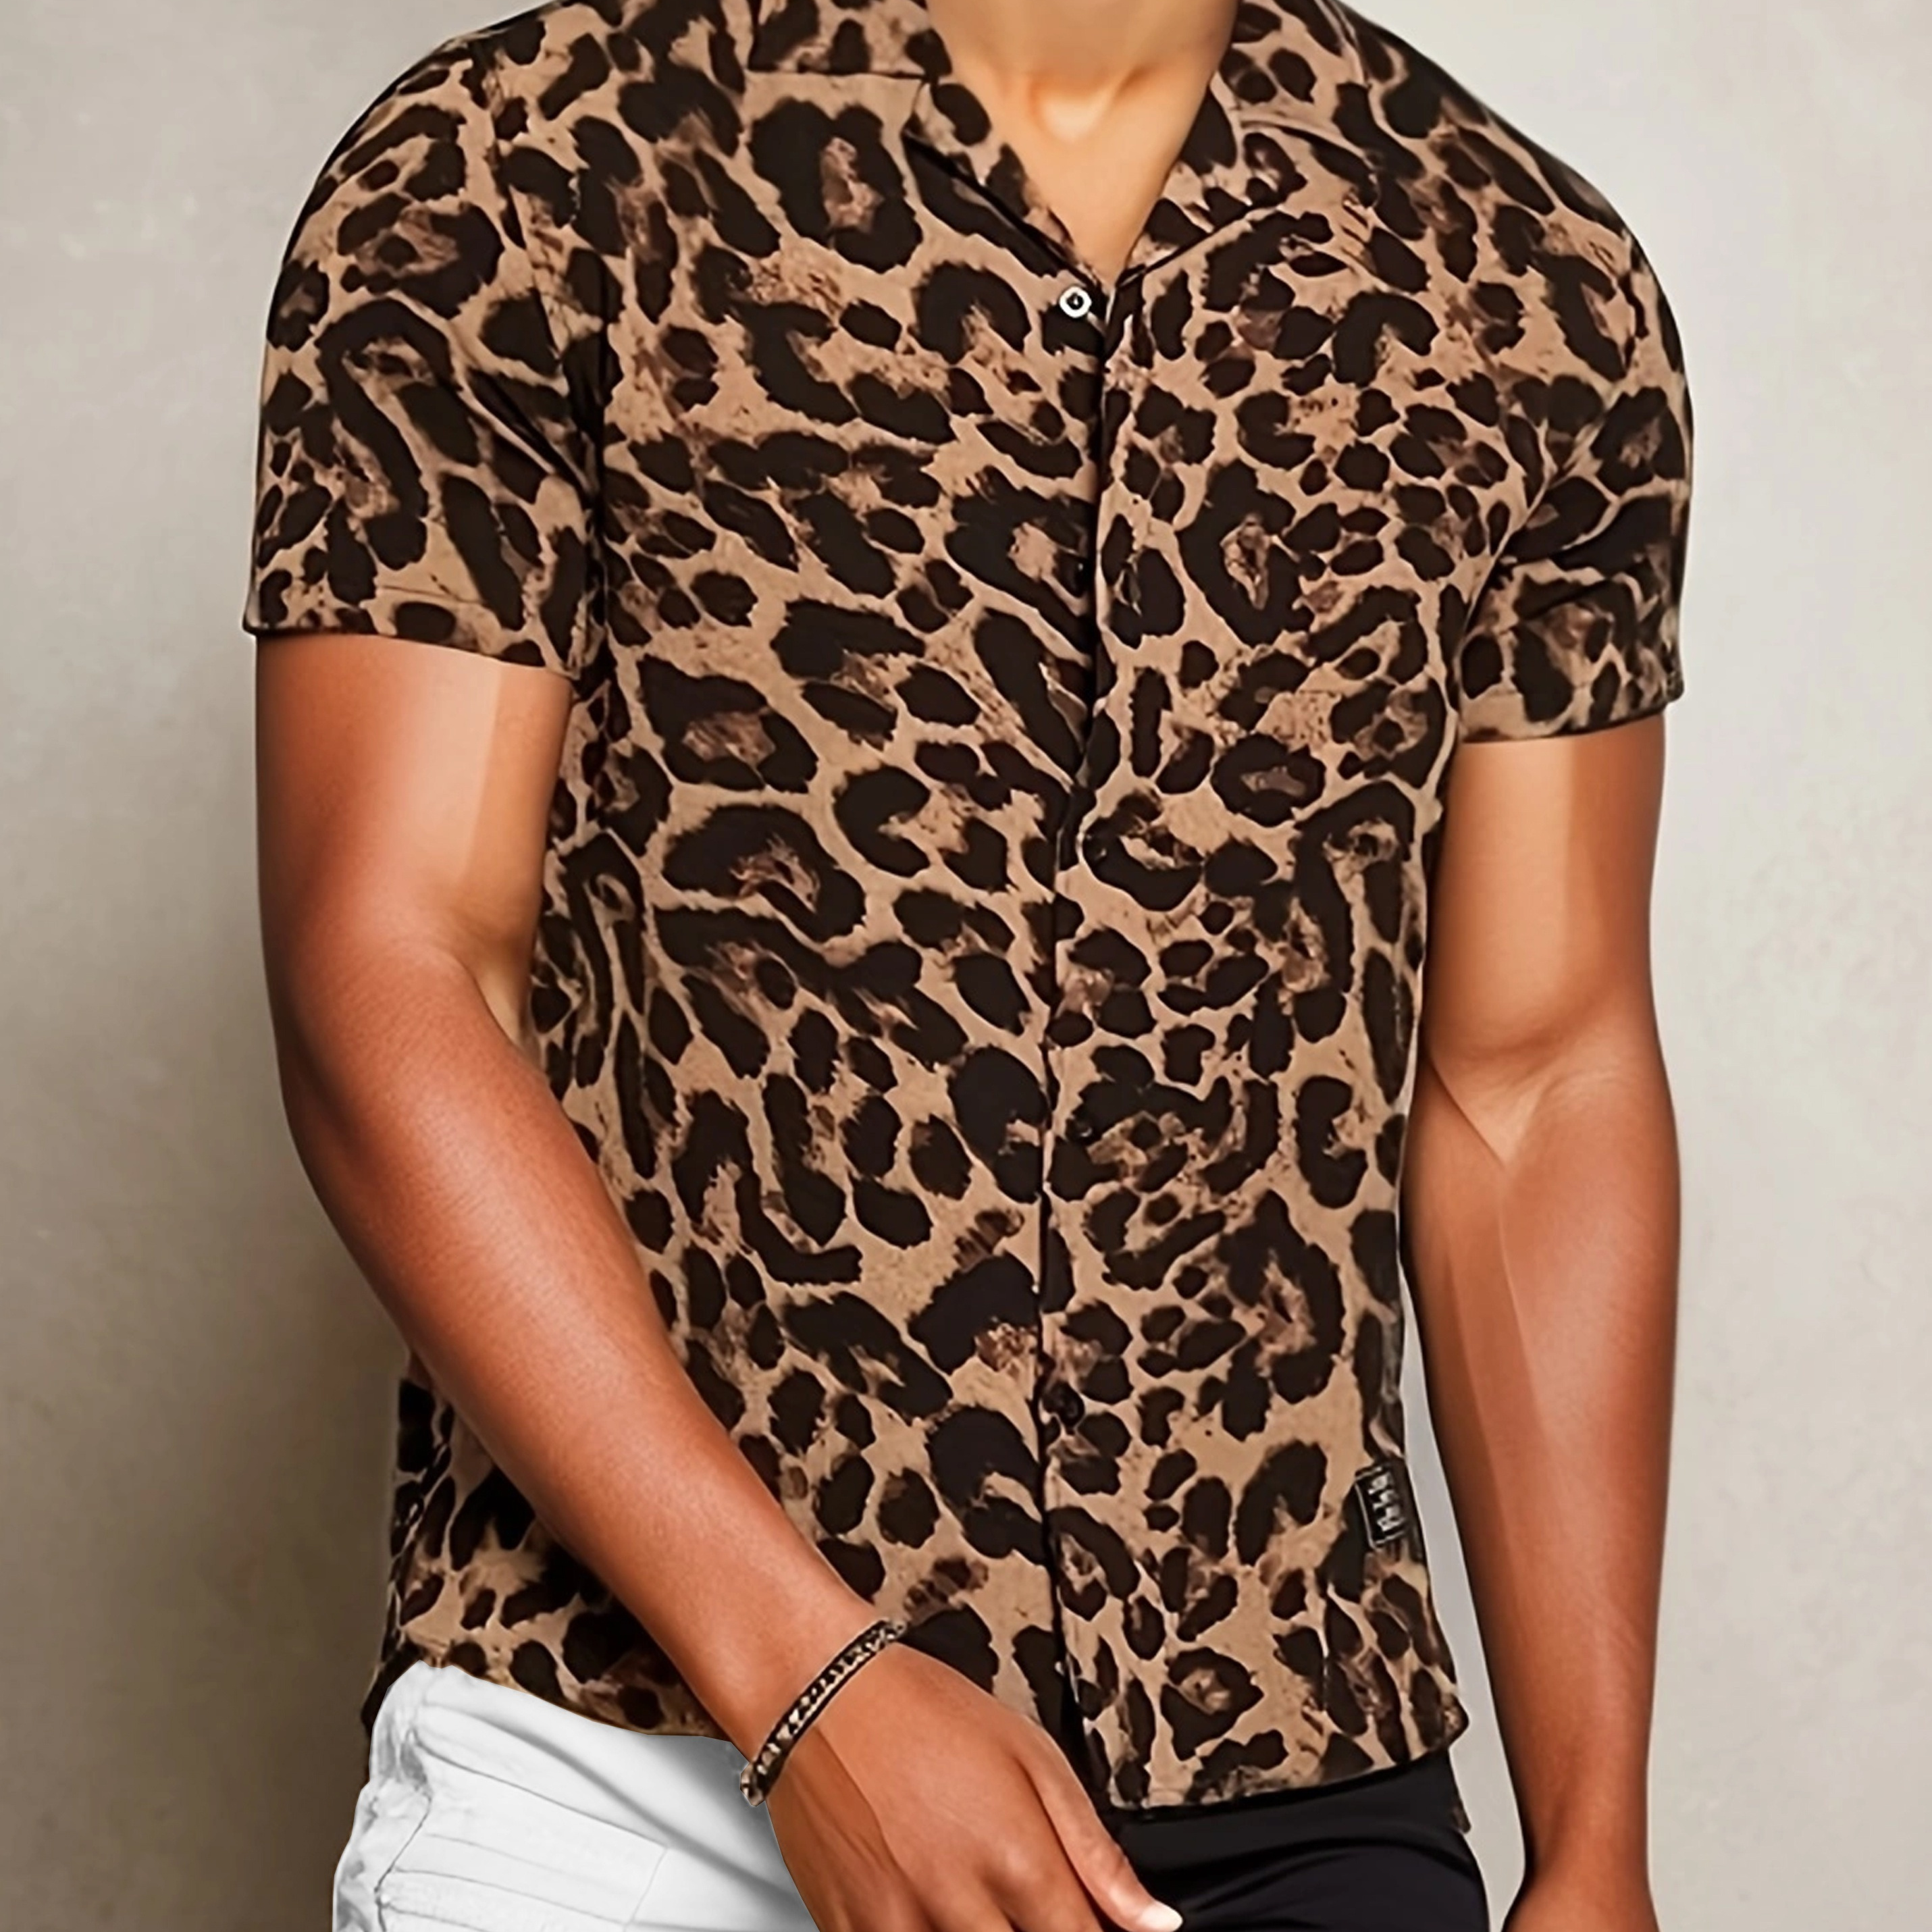 

Men's Leopard Print Shirt In Casual Style, Men's Short-sleeve Button-up Shirt, Slim Fit Fashion Top For Daily Wear & Party